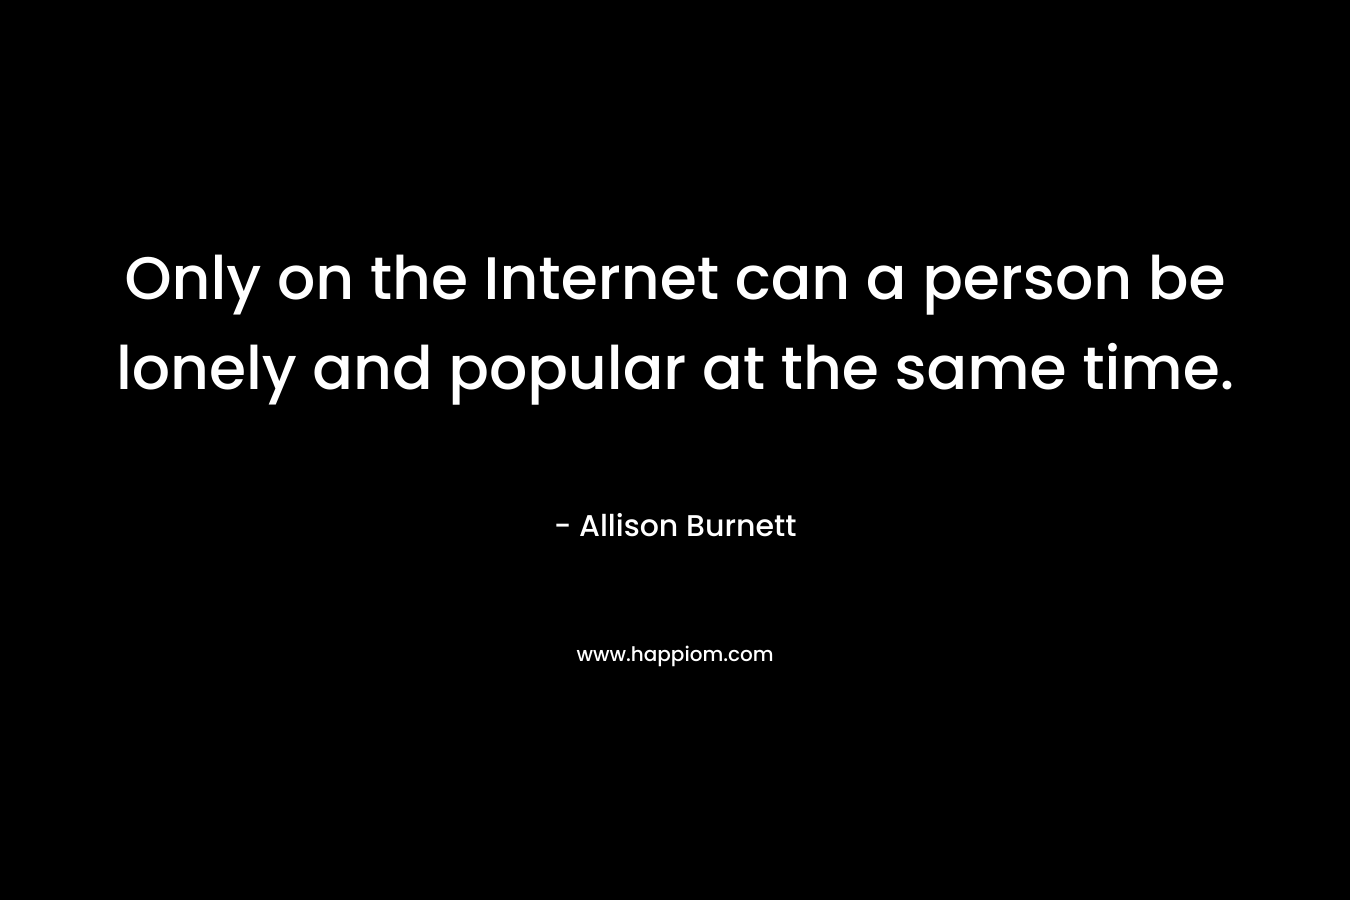 Only on the Internet can a person be lonely and popular at the same time.